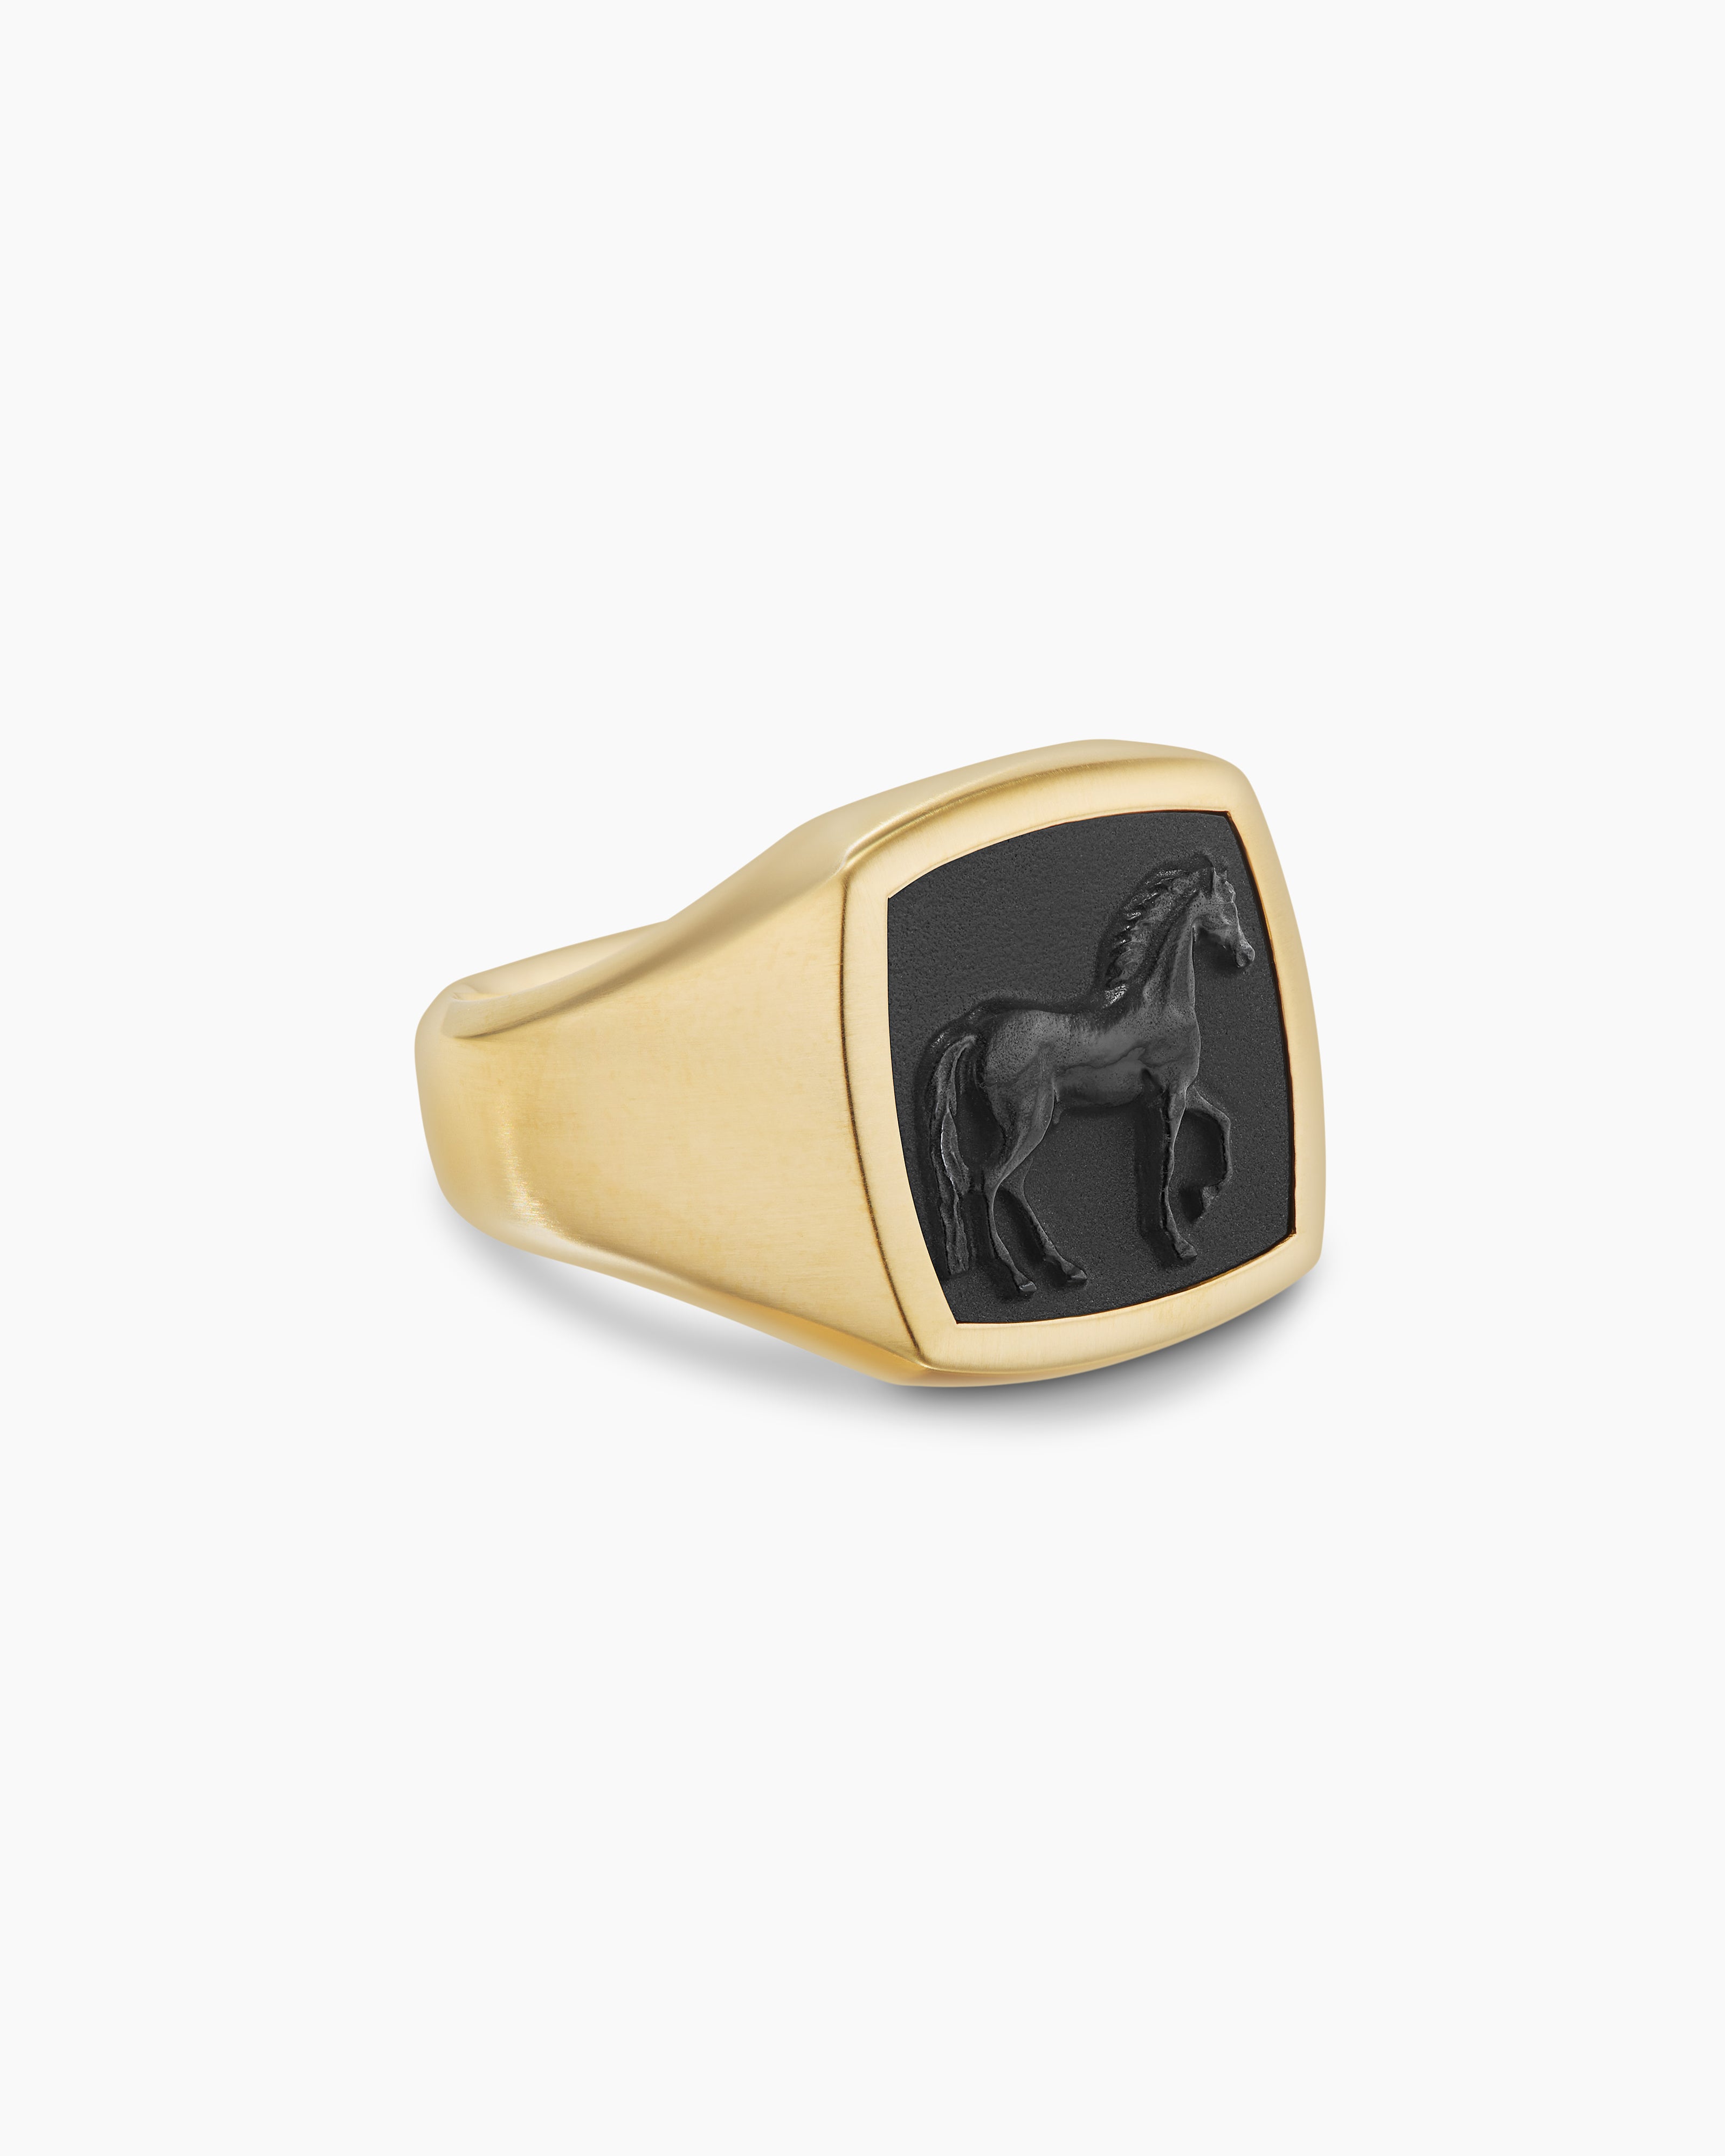 CrazyAss Jewelry Designs mens signet ring black silver signet ring, family  India | Ubuy